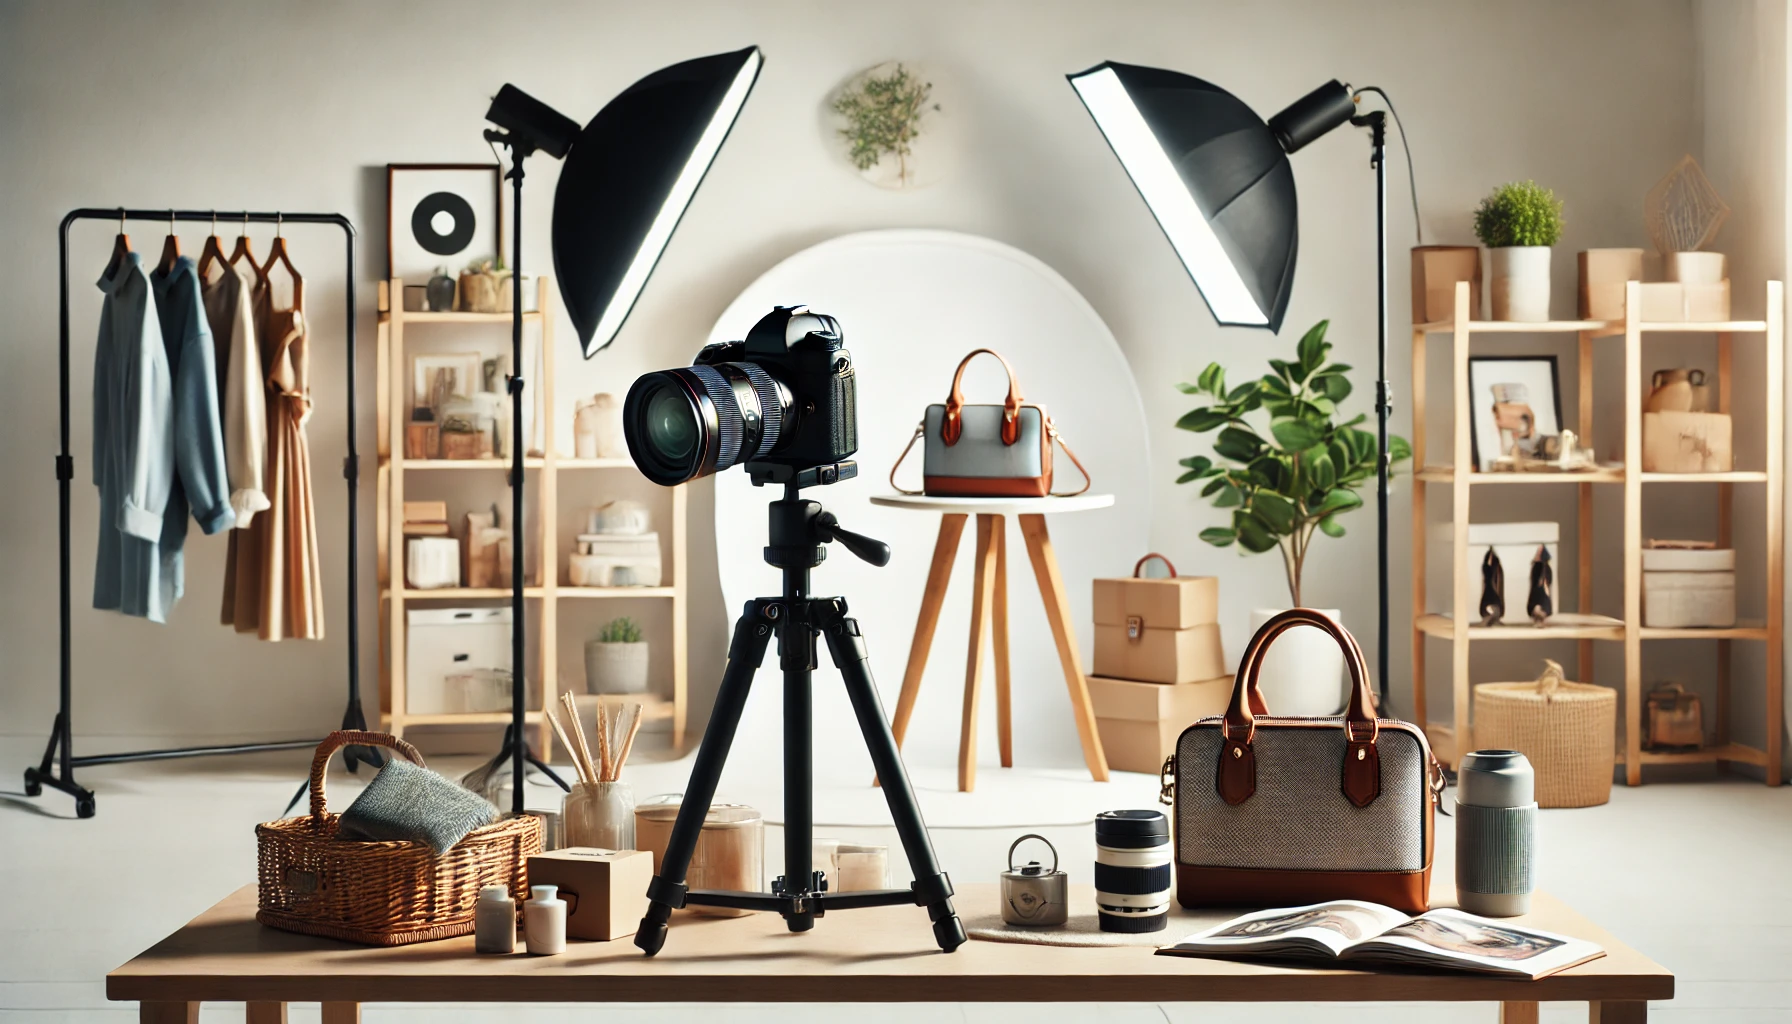 Product Photography: Creating Effective Visuals For Your Online Store